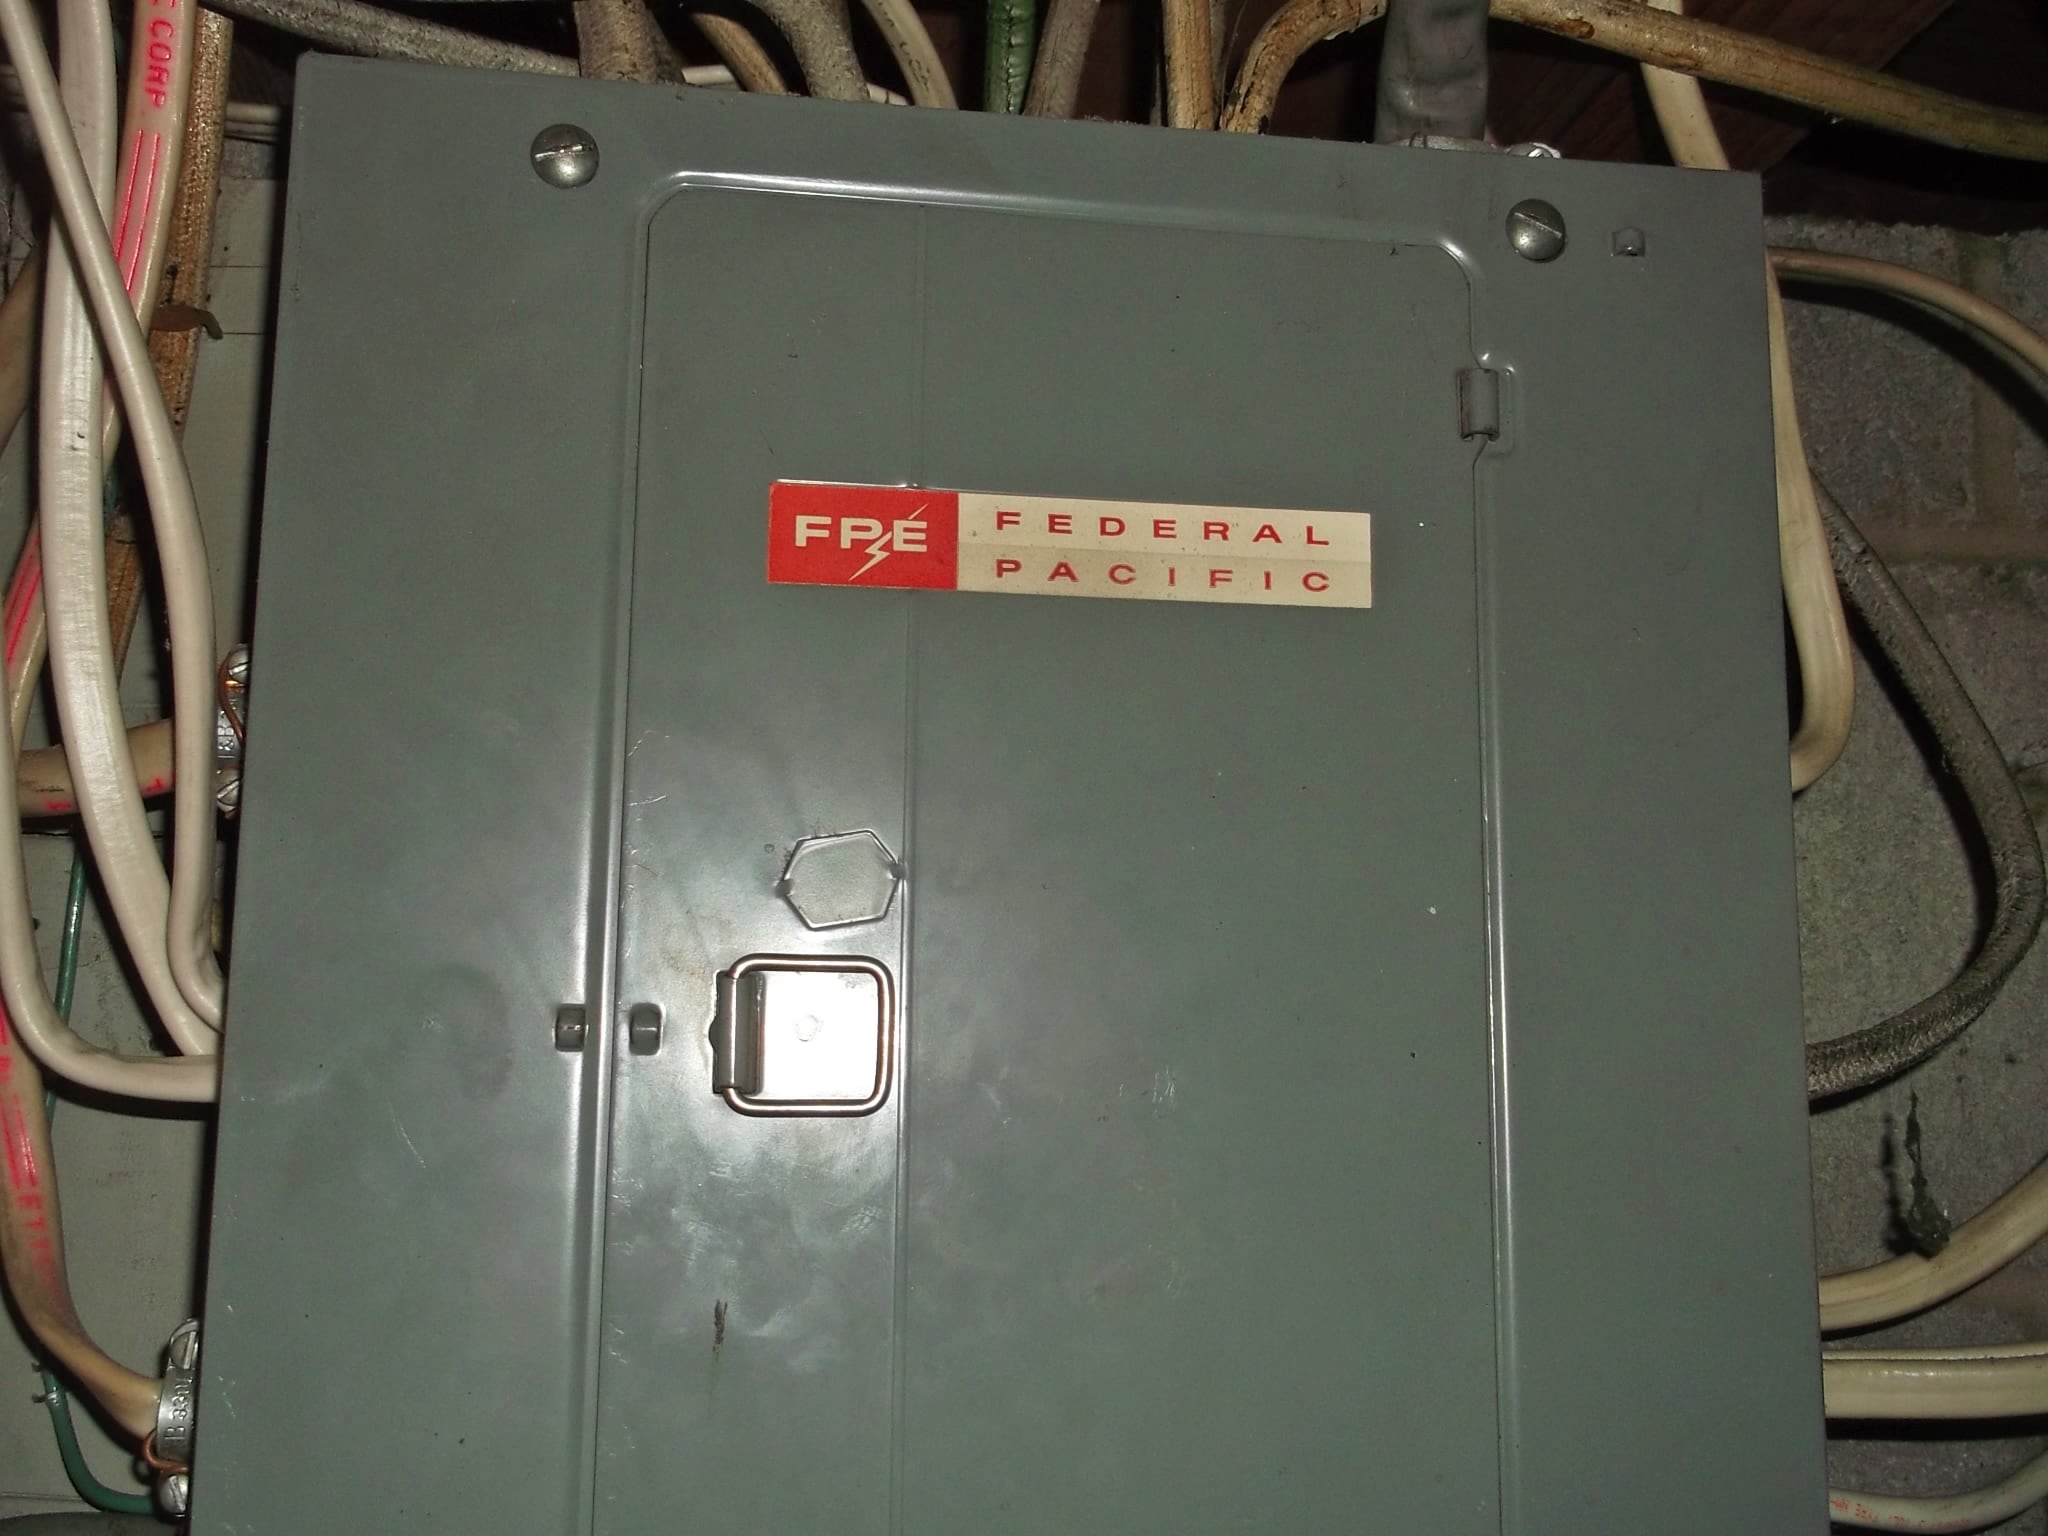 Are Federal Pacific Circuit Breaker Panels Safe? | Angie's List